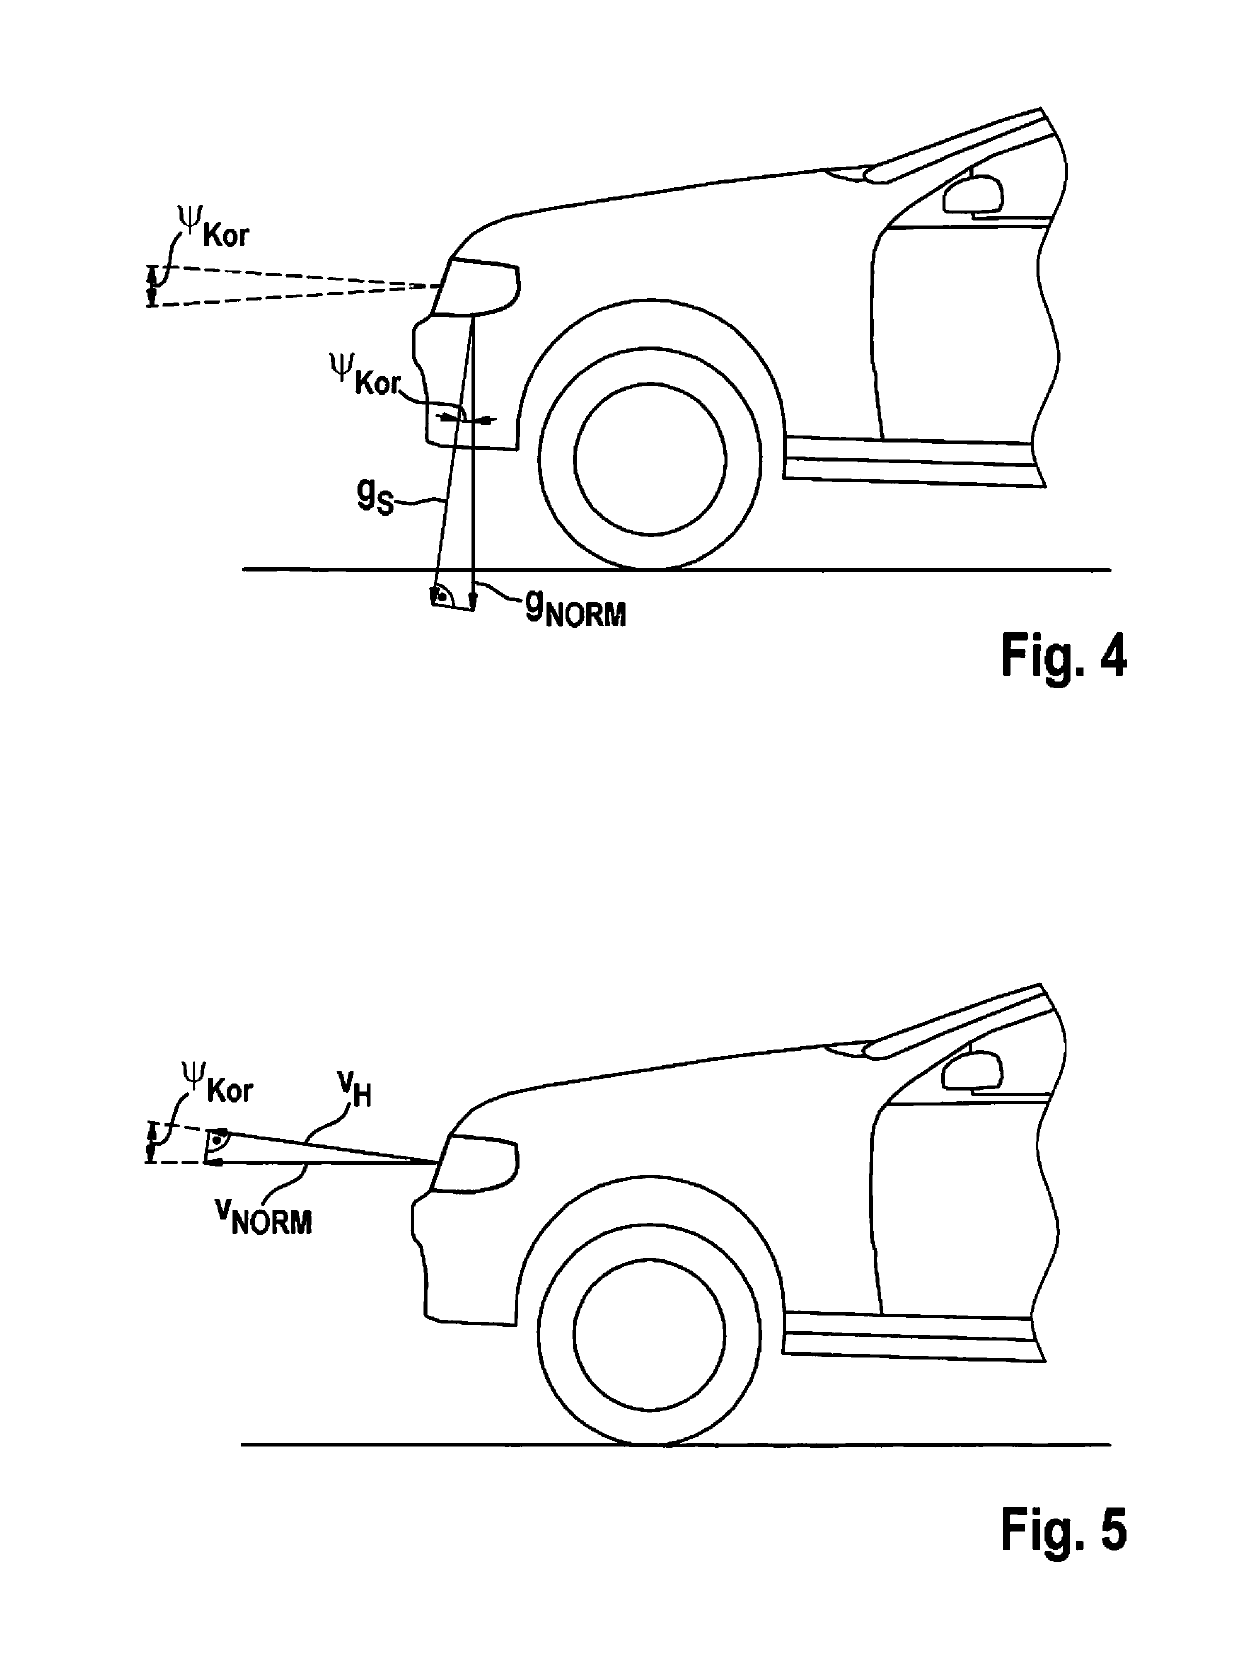 Method and system for the automatic adjustment of an angle of inclination of a vehicle headlight